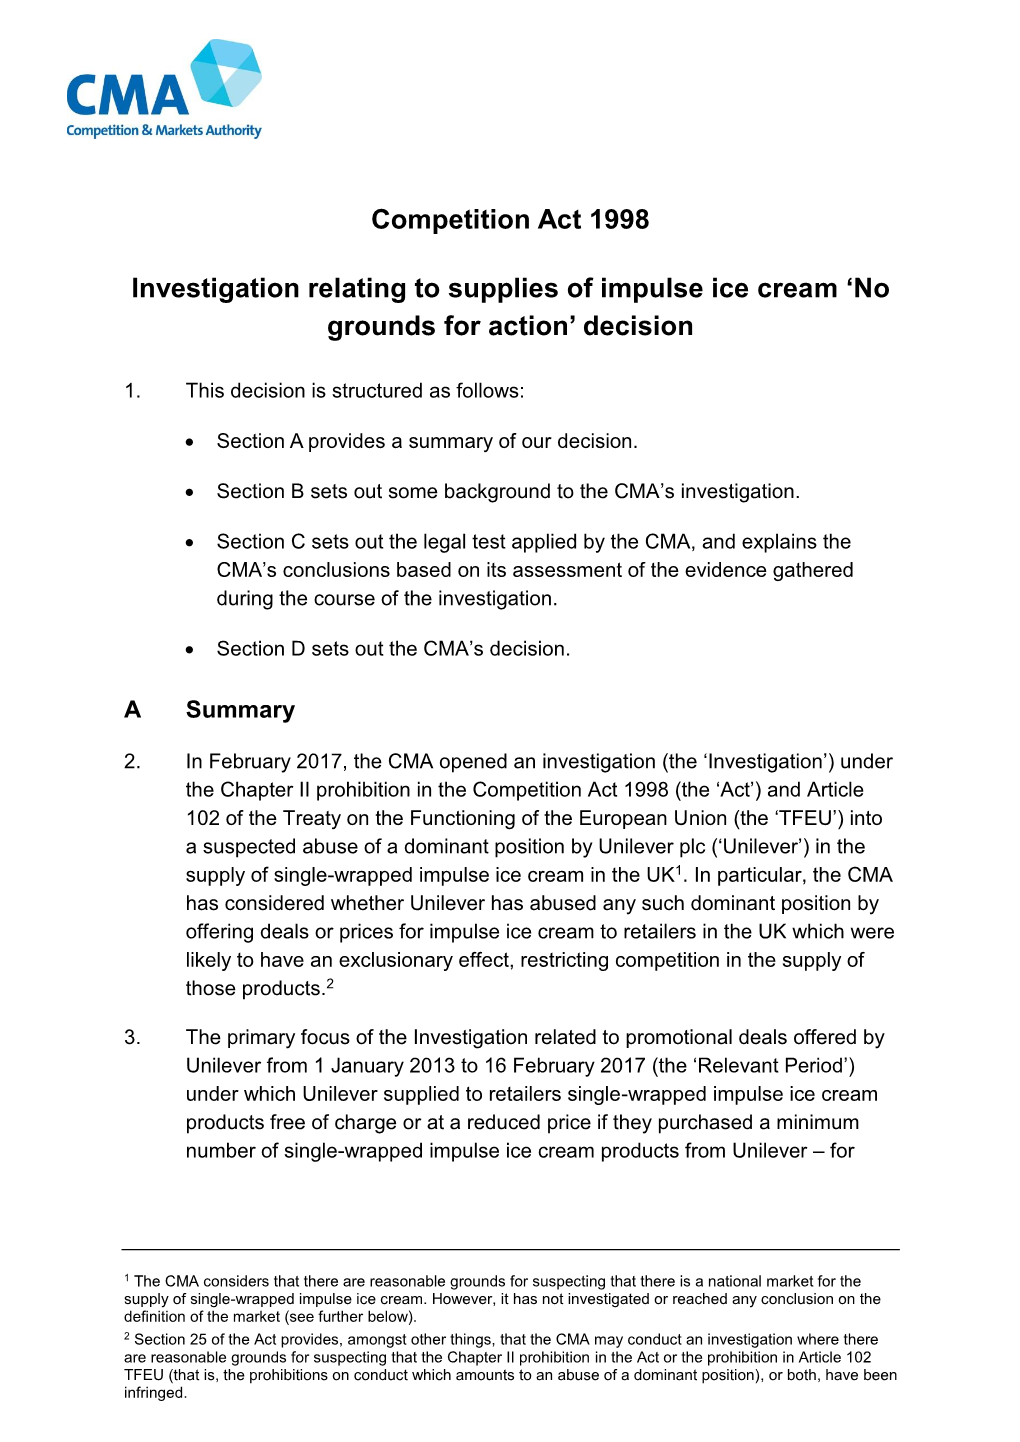 Investigation Relating to Supplies of Impulse Ice Cream ‘No Grounds for Action’ Decision